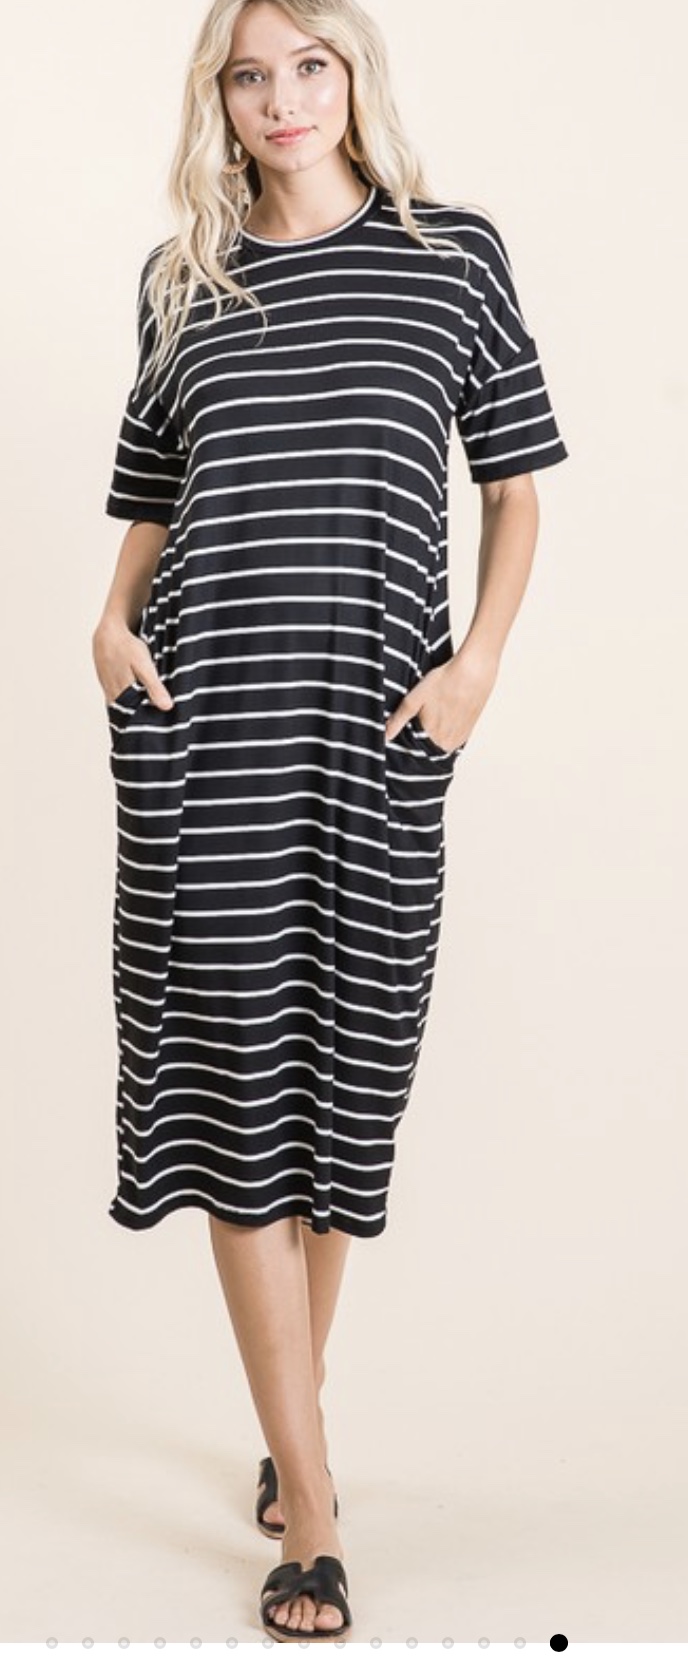 Striped Midi Dress - Styled Chaos Boutique